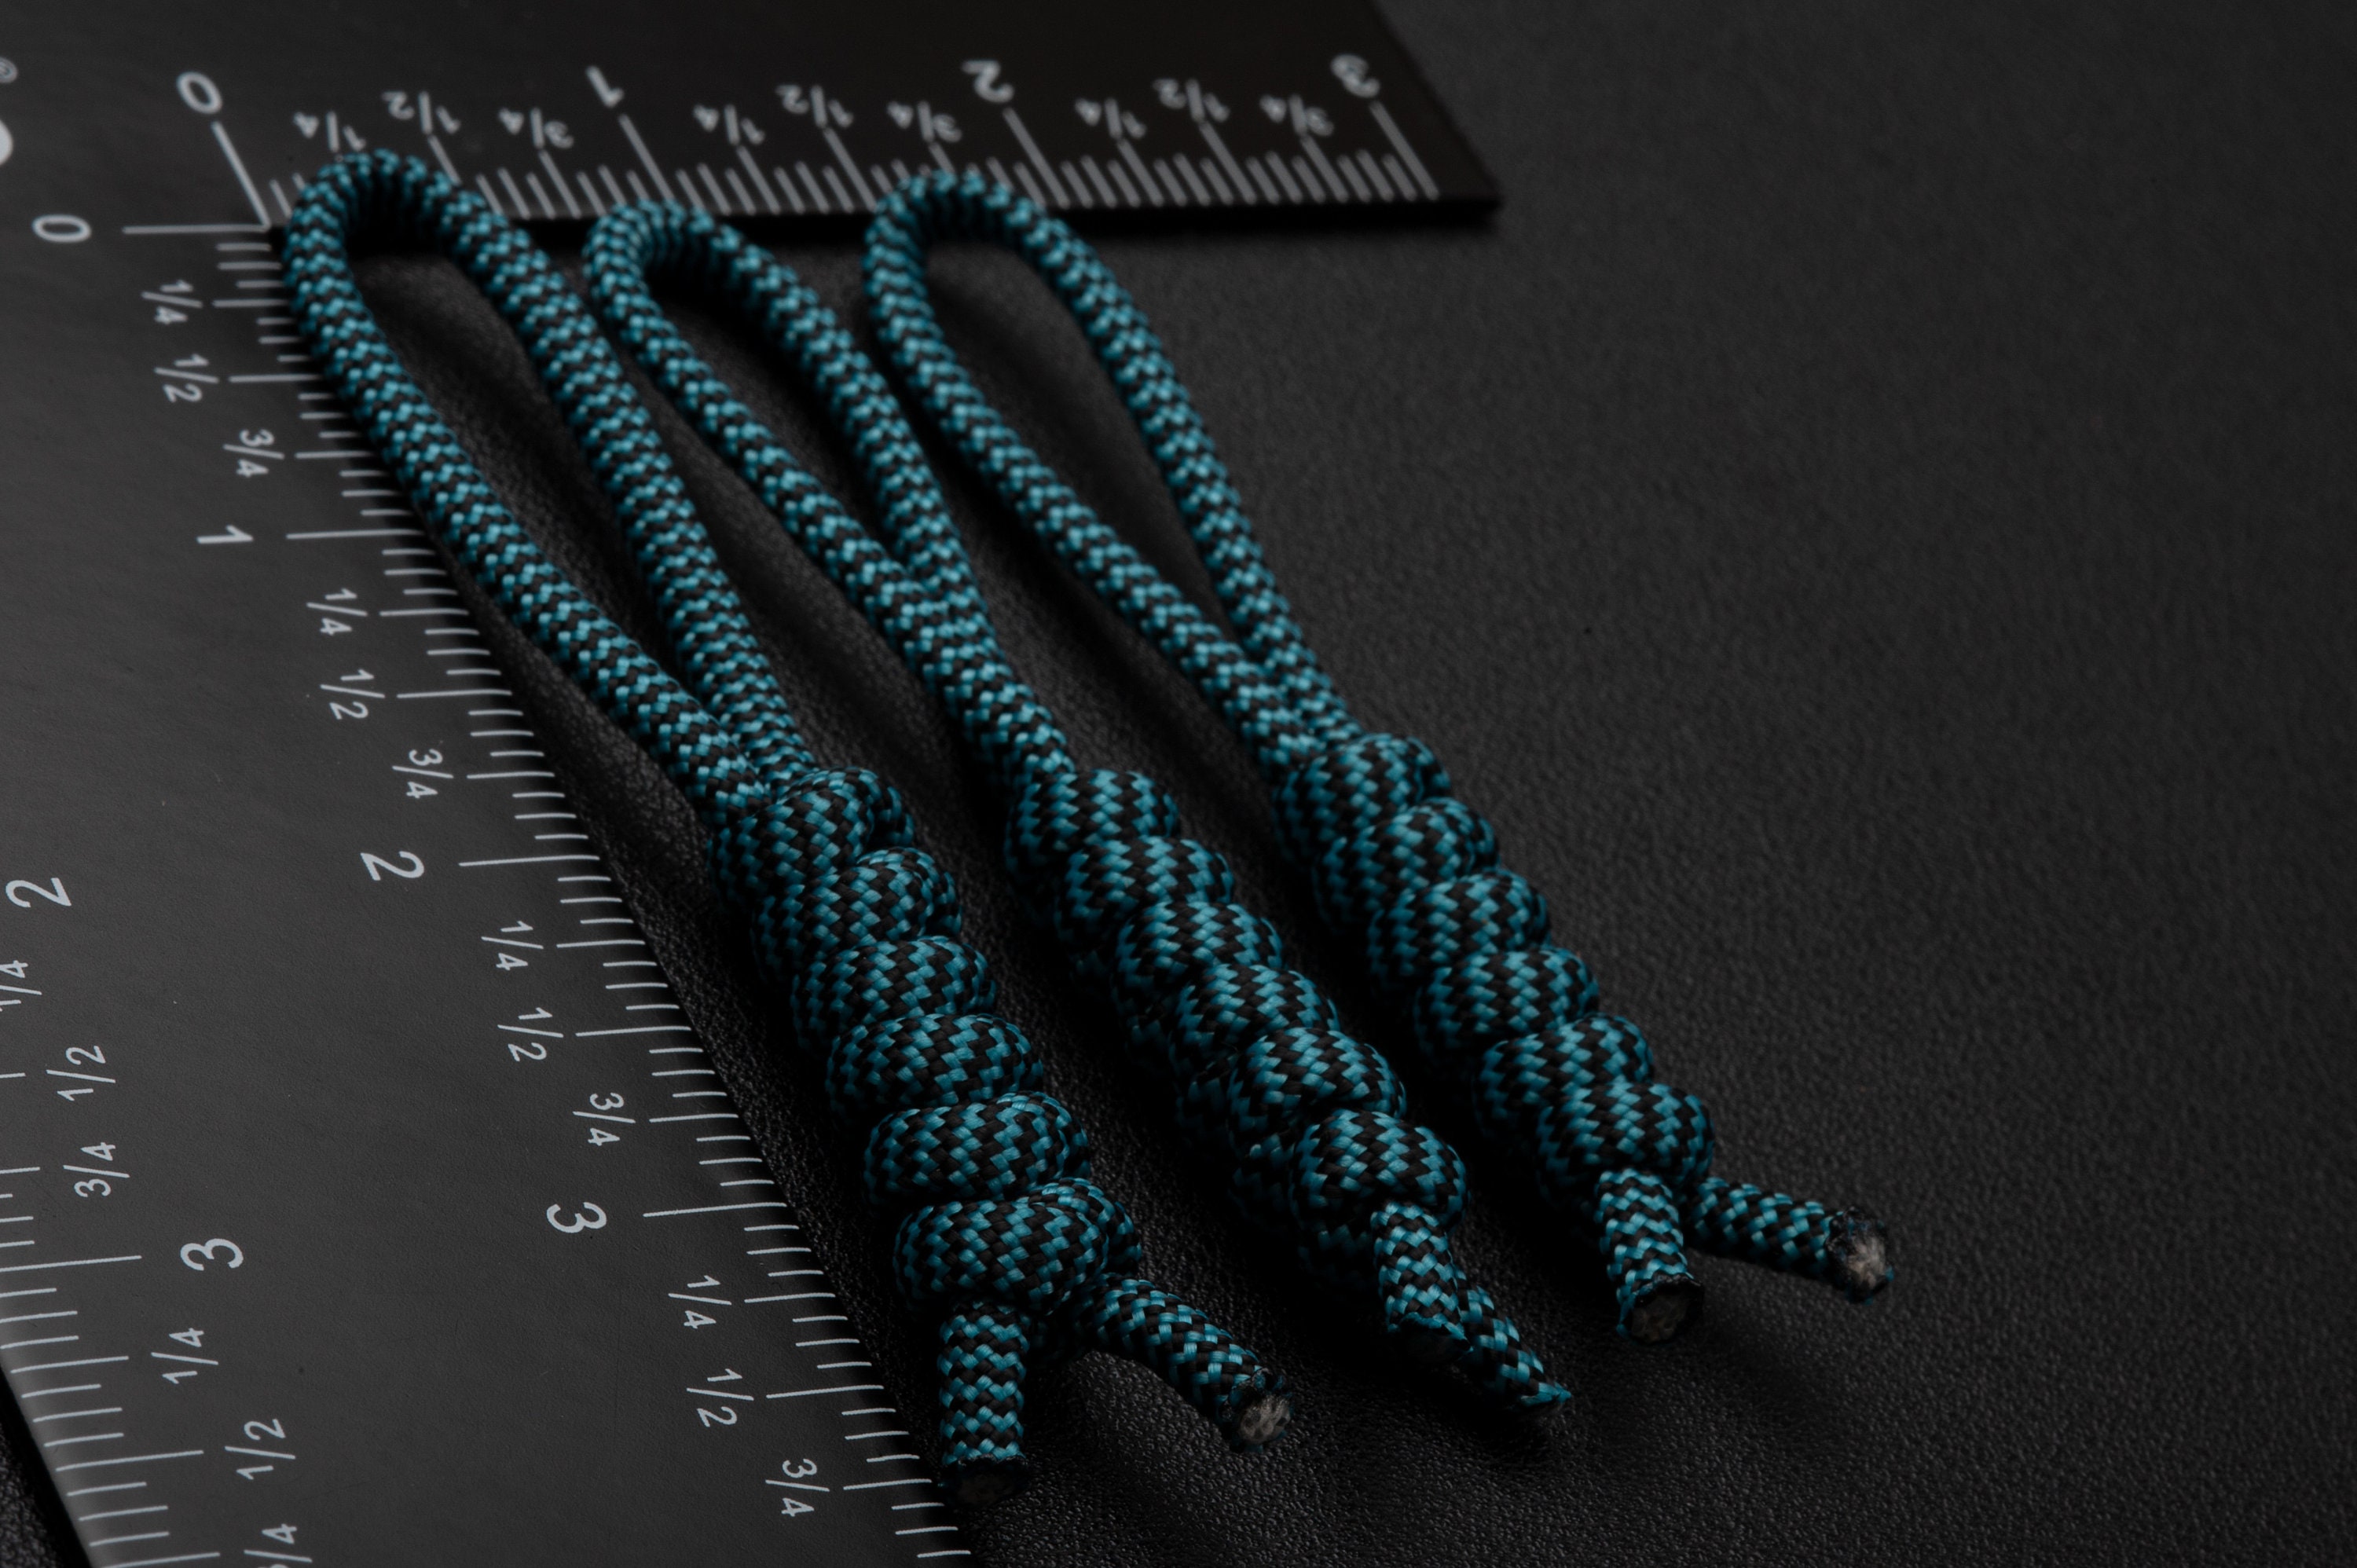 Paracord Zipper Pulls For All! Learn 8 Amazing Paracord Zipper Pull Knots